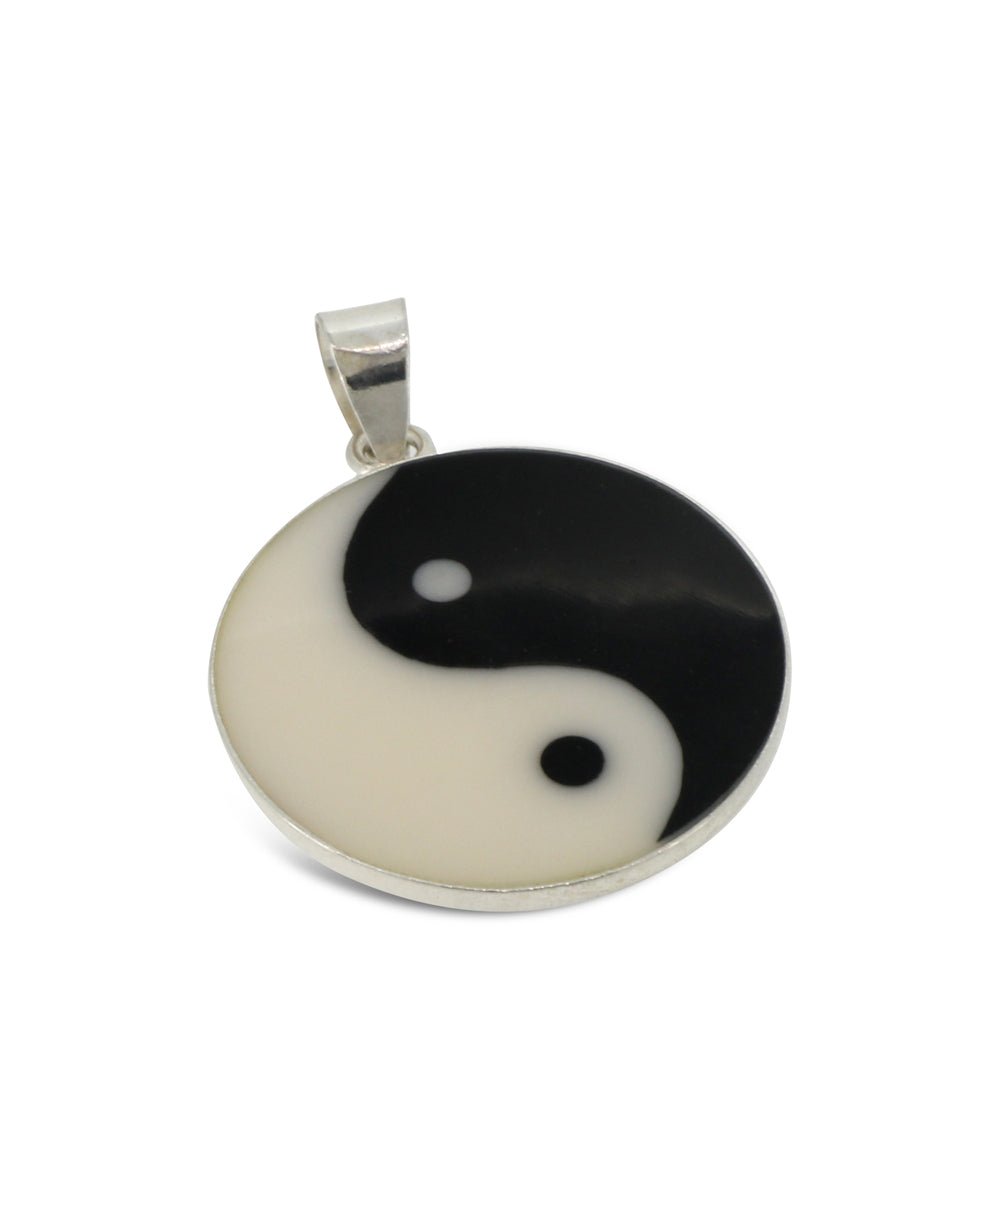 Sterling Silver Yin Yang Pendant with Mother of Pearl - Charms & Pendants